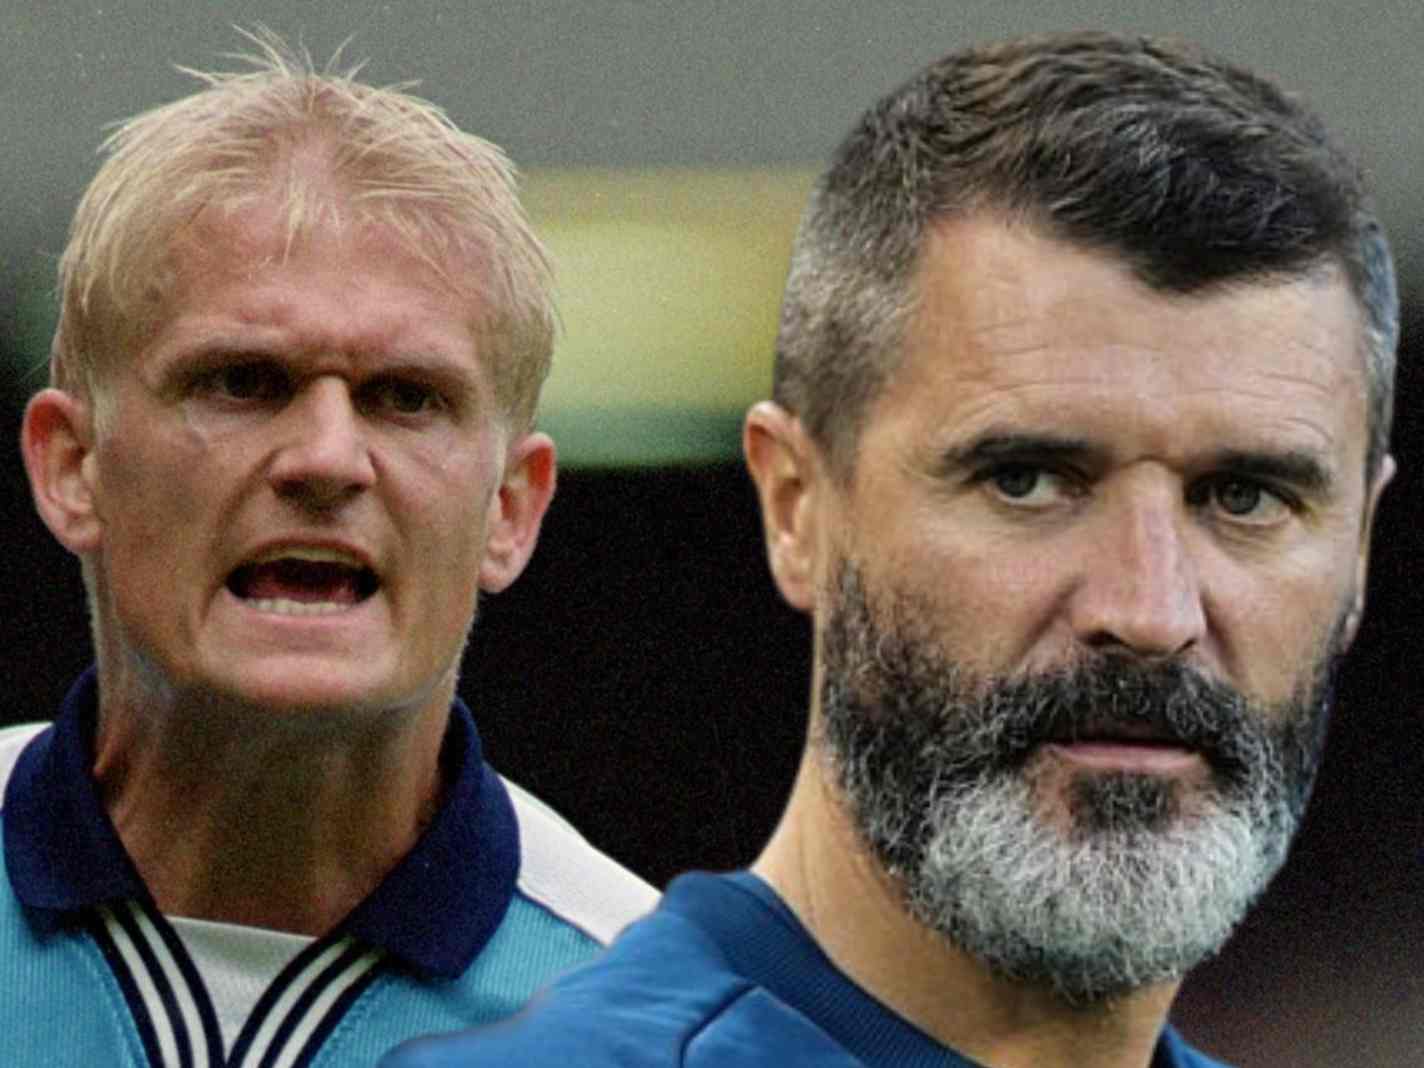 What did Alfie Haaland say to provoke that infamous Roy Keane tackle